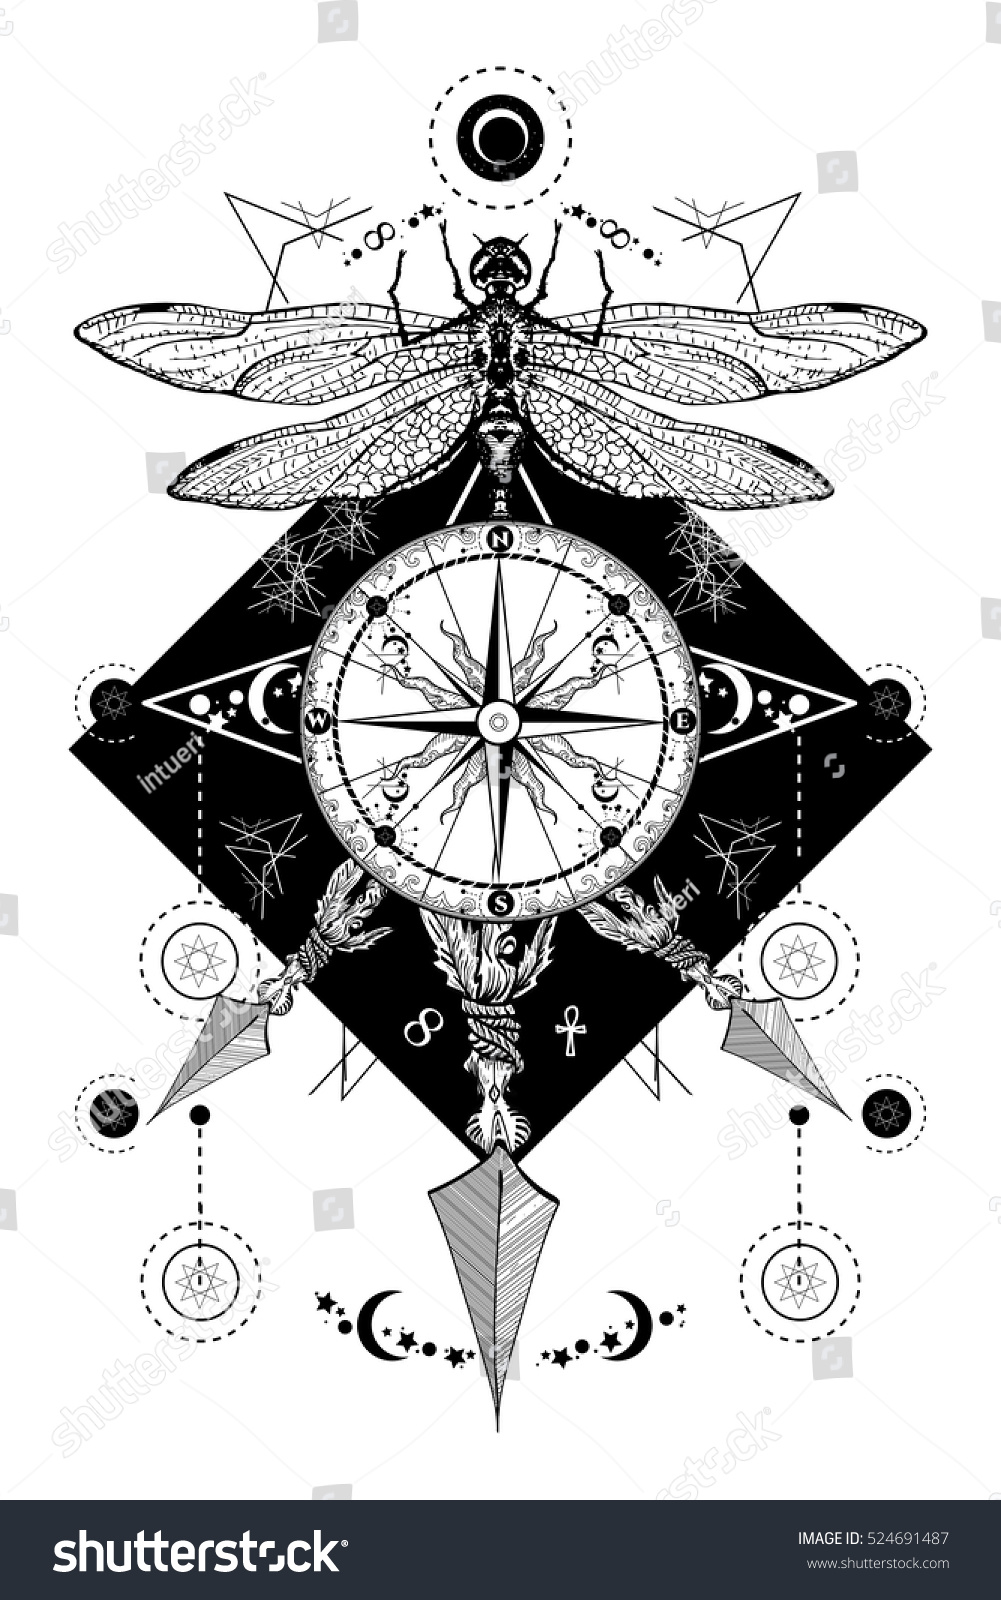 Dragonfly Compass Crossed Arrows Tattoo Mystical Stock ...